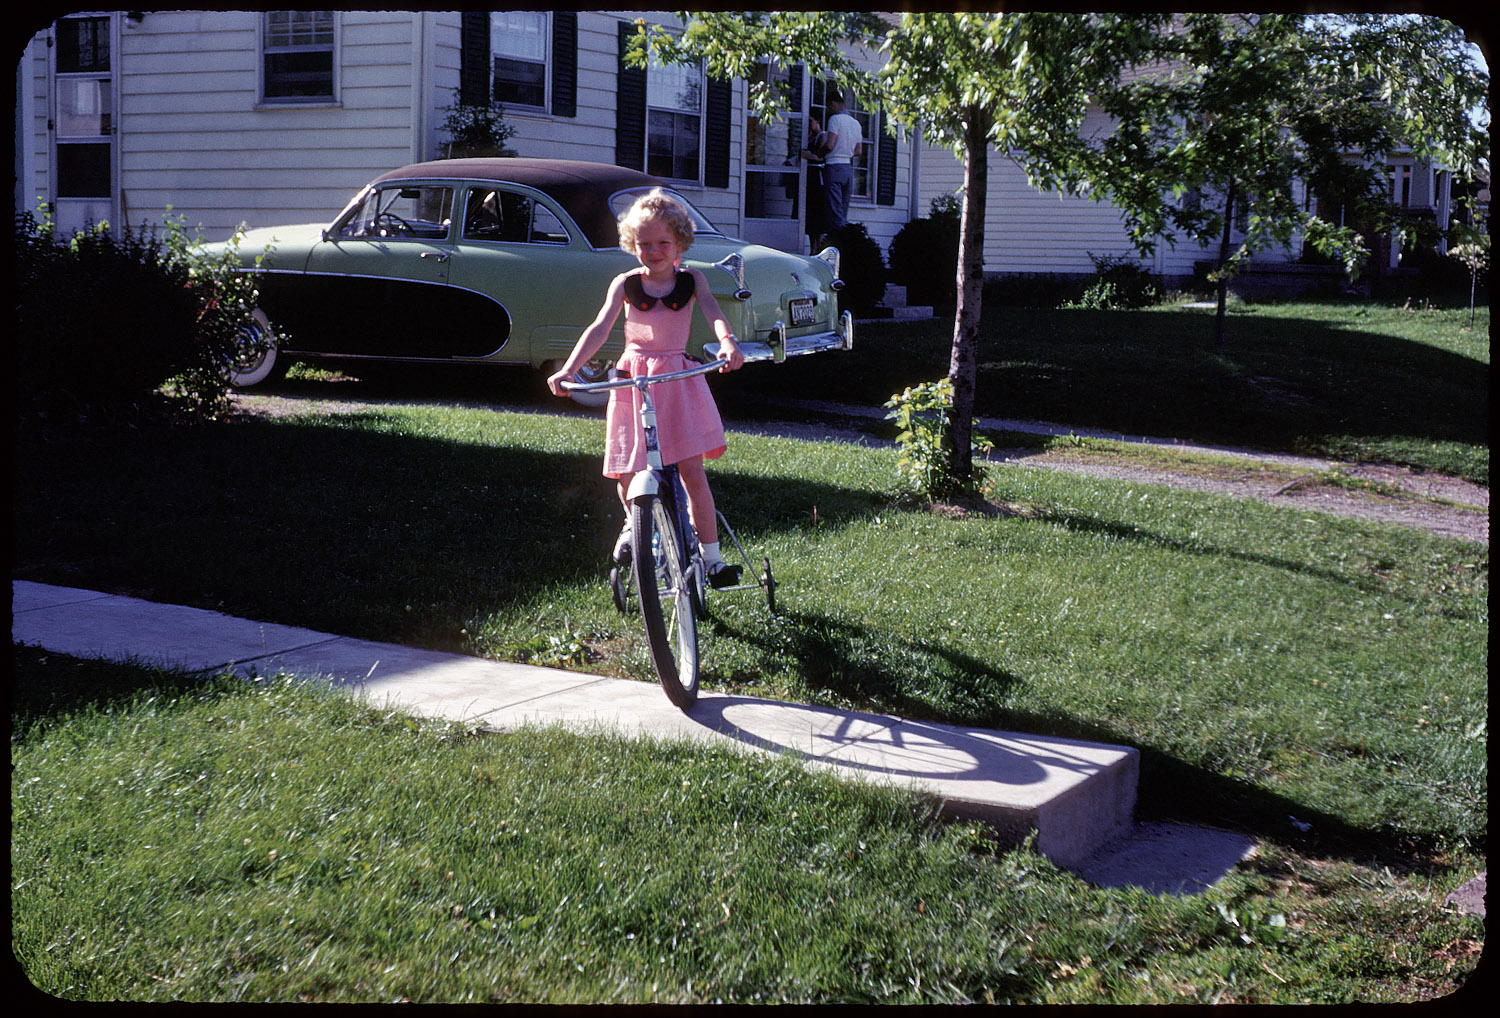 Circa 1952, possibly in Indiana. Another image from Set 2 of found 35mm Kodachromes. Note the Cadillac-inspired tacked-on tailfins on the Ford, which we'll tentatively identify as a 1950 Crestliner. View full size.